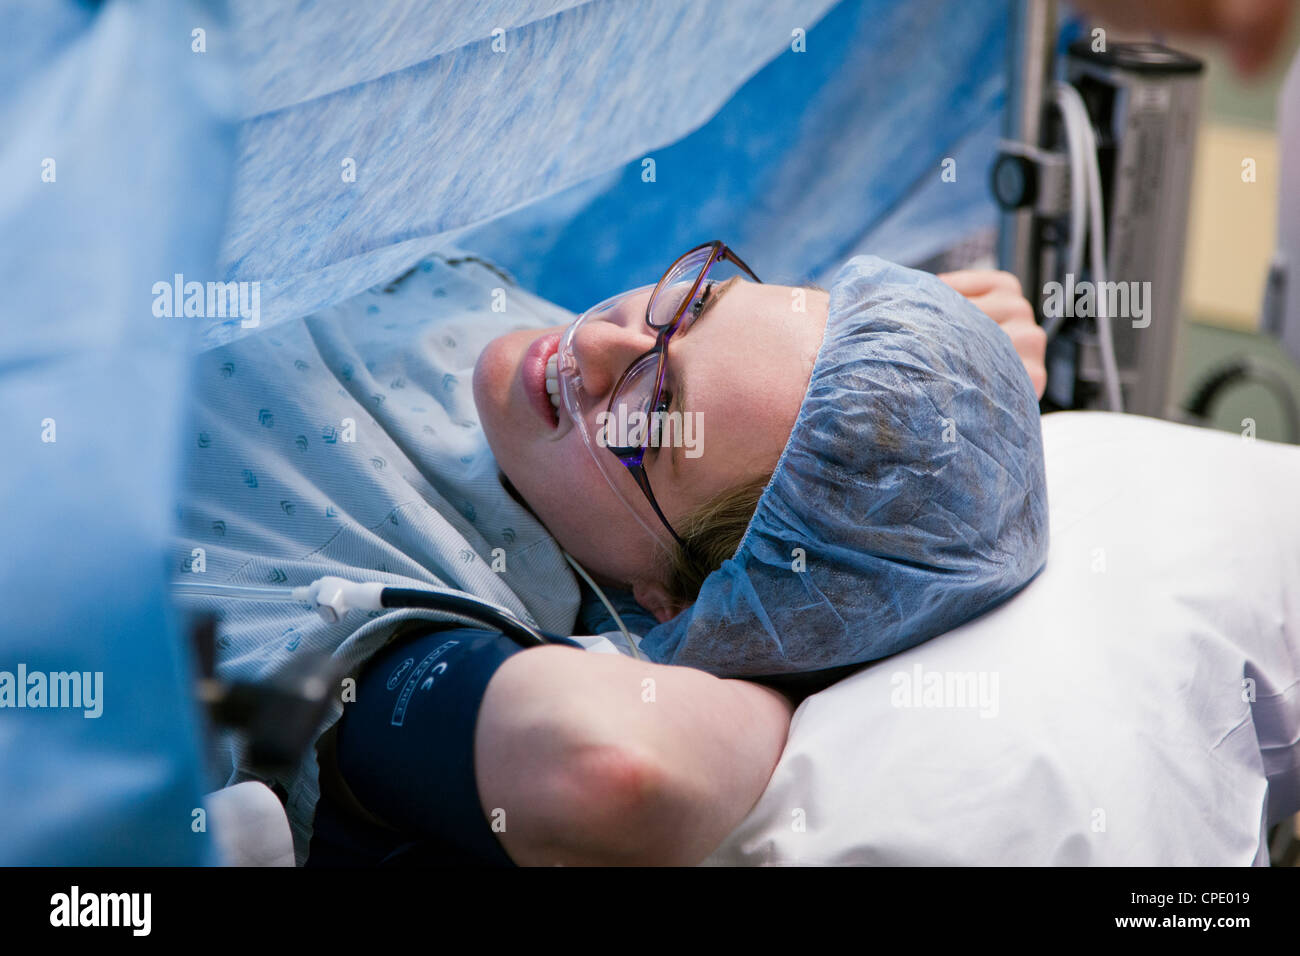 Female patient on an operating room table in a hospital surgical suite Stock Photo